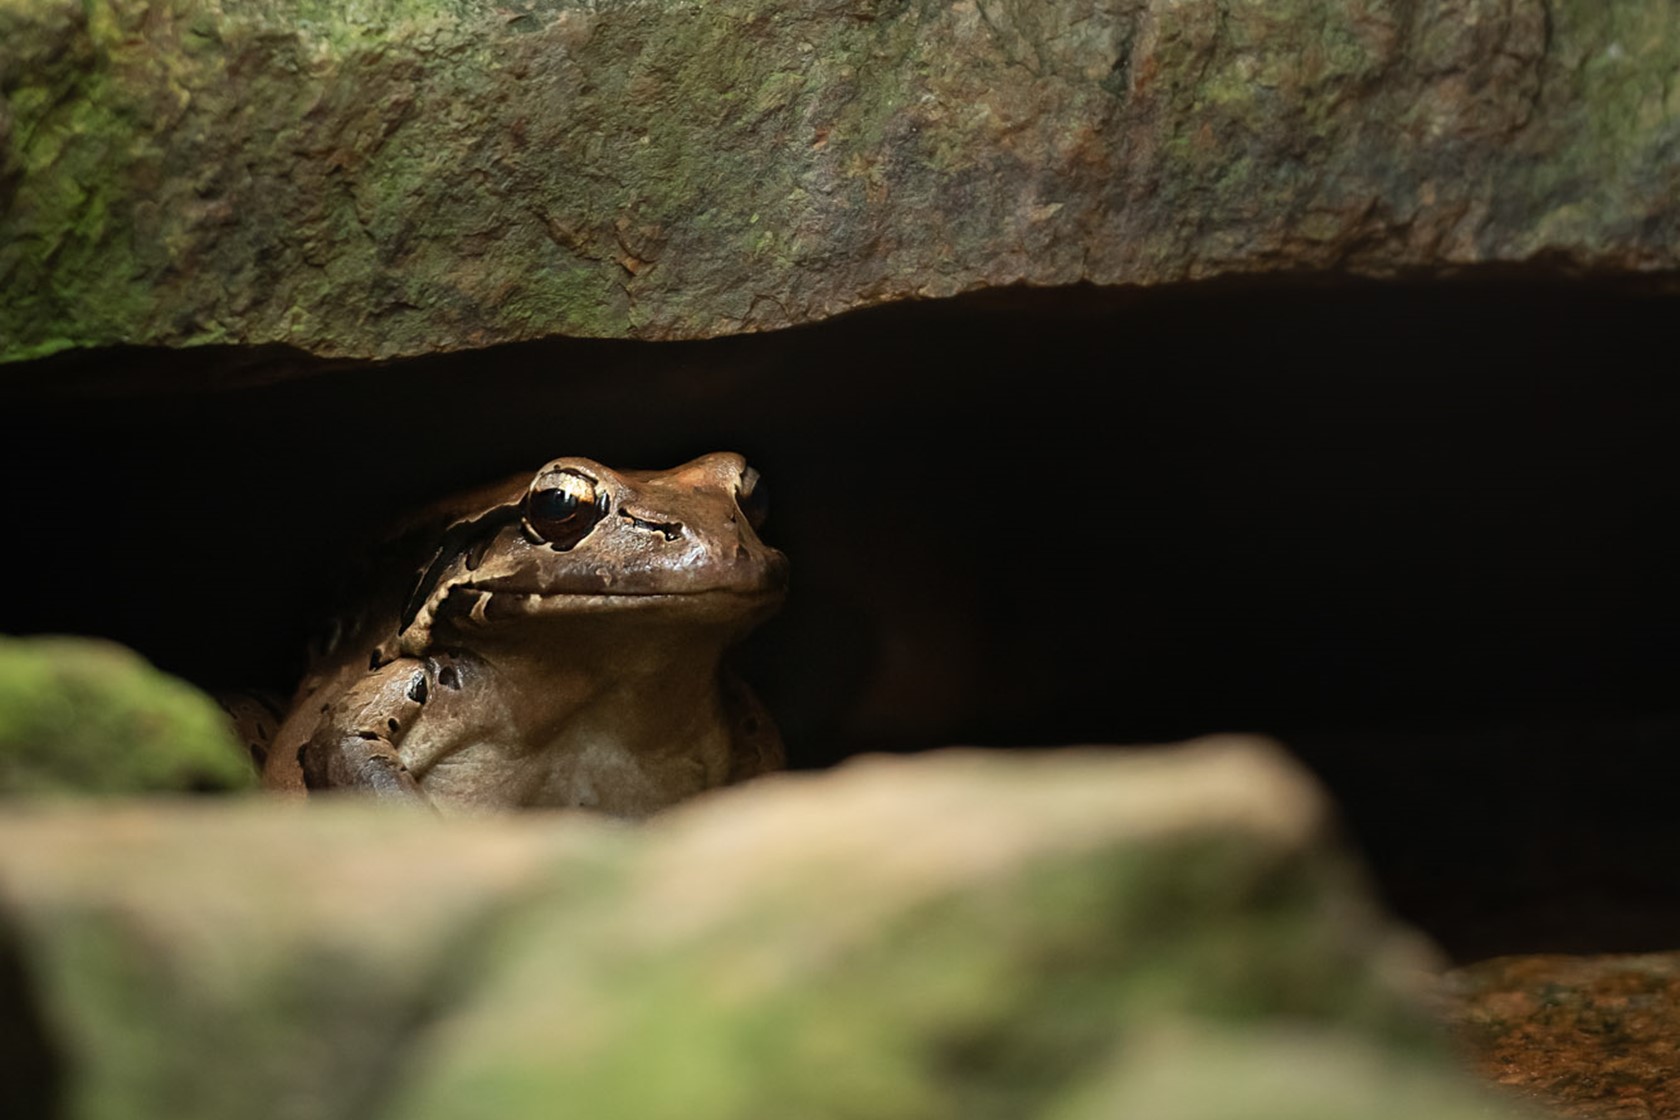 Mountain chicken frog sits under a rocky ledge